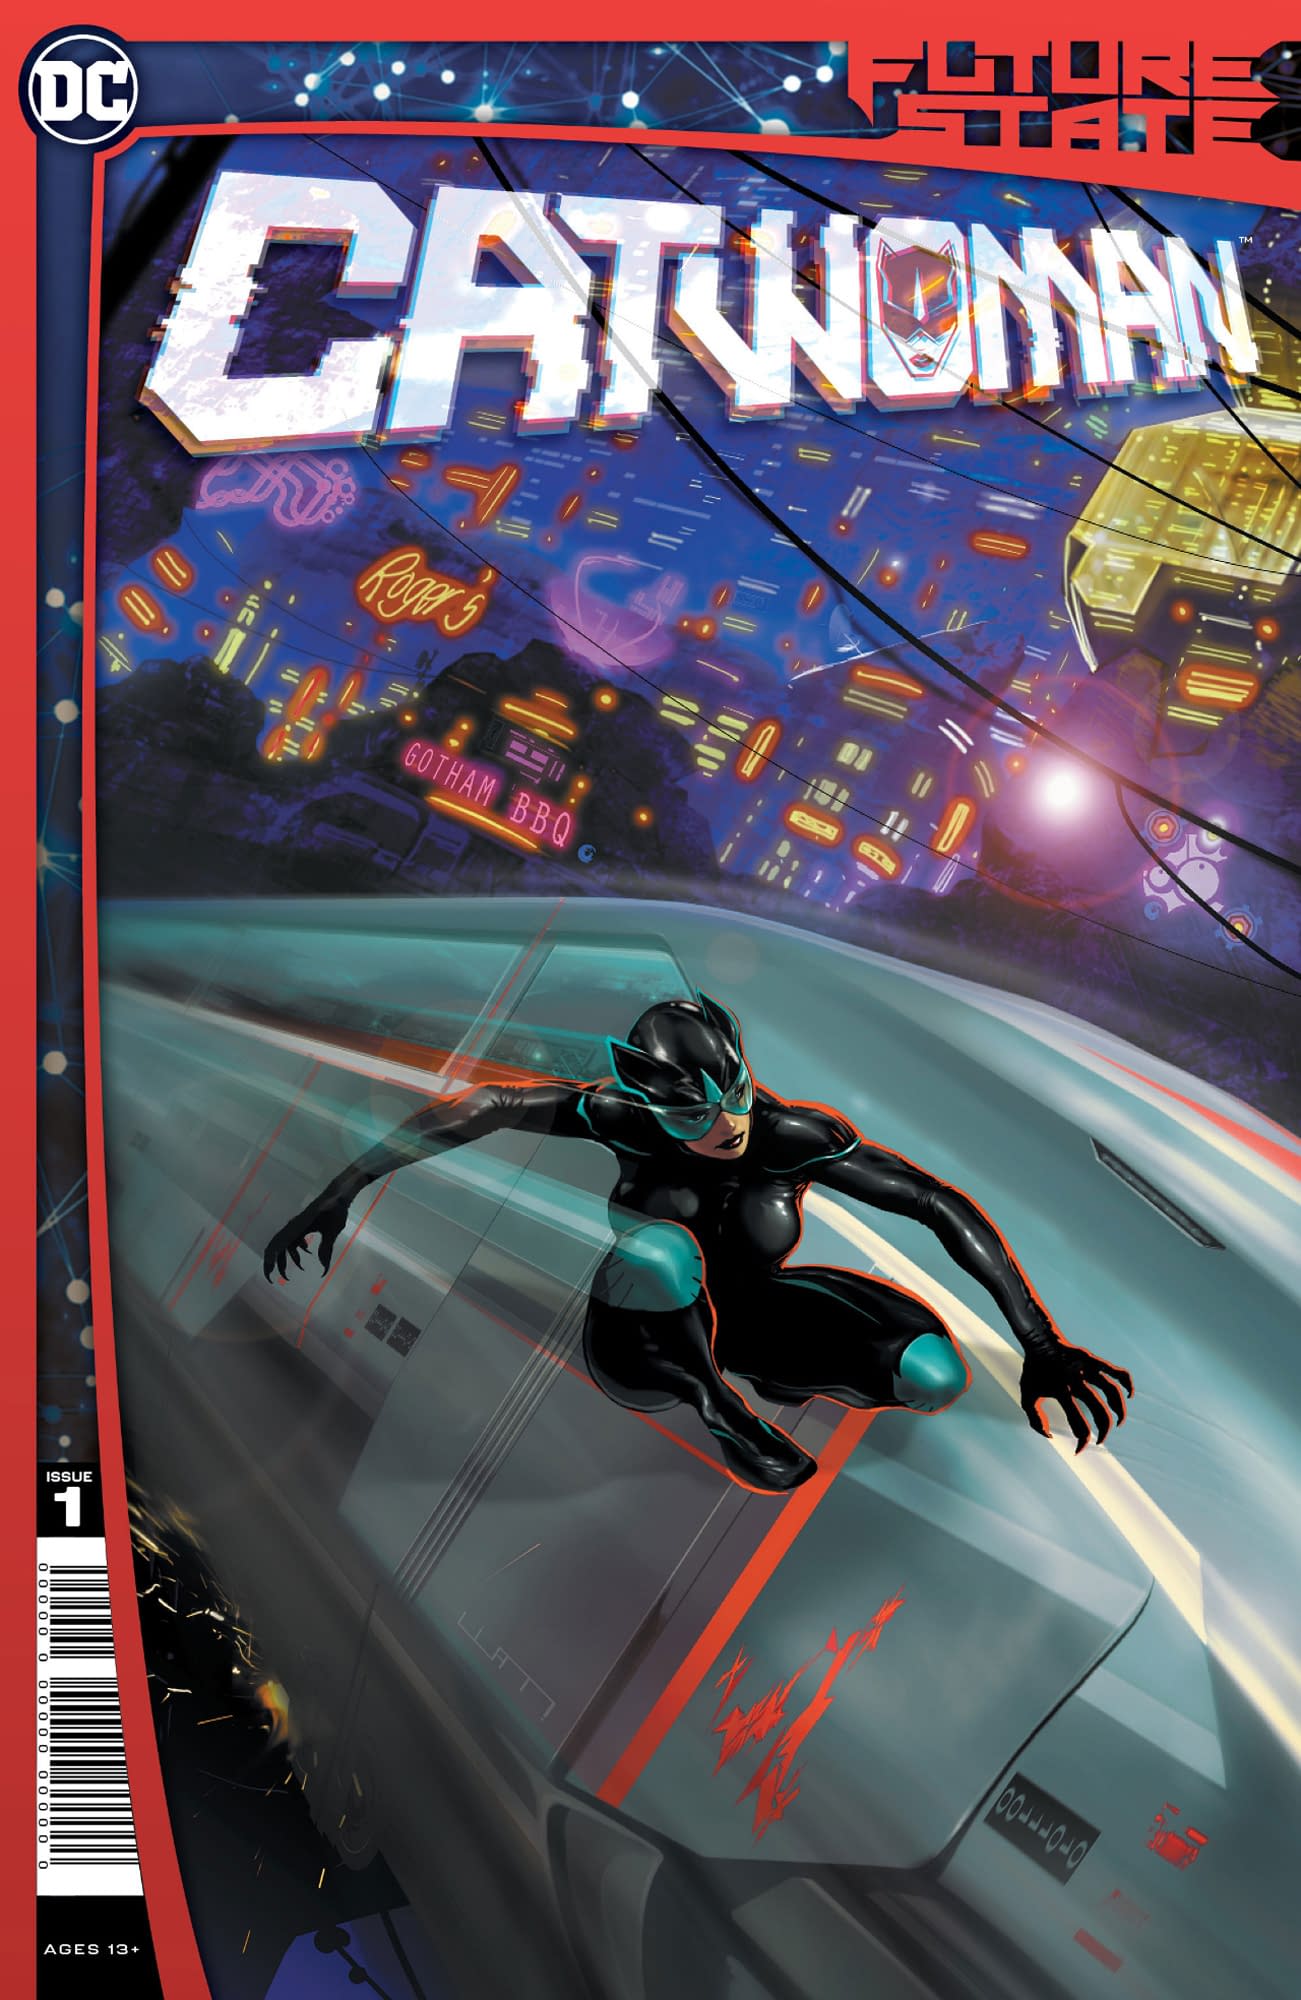 Catwoman crouches comfortably on the side of speeding train in future Gotham City. Cover art by Liam Sharp.